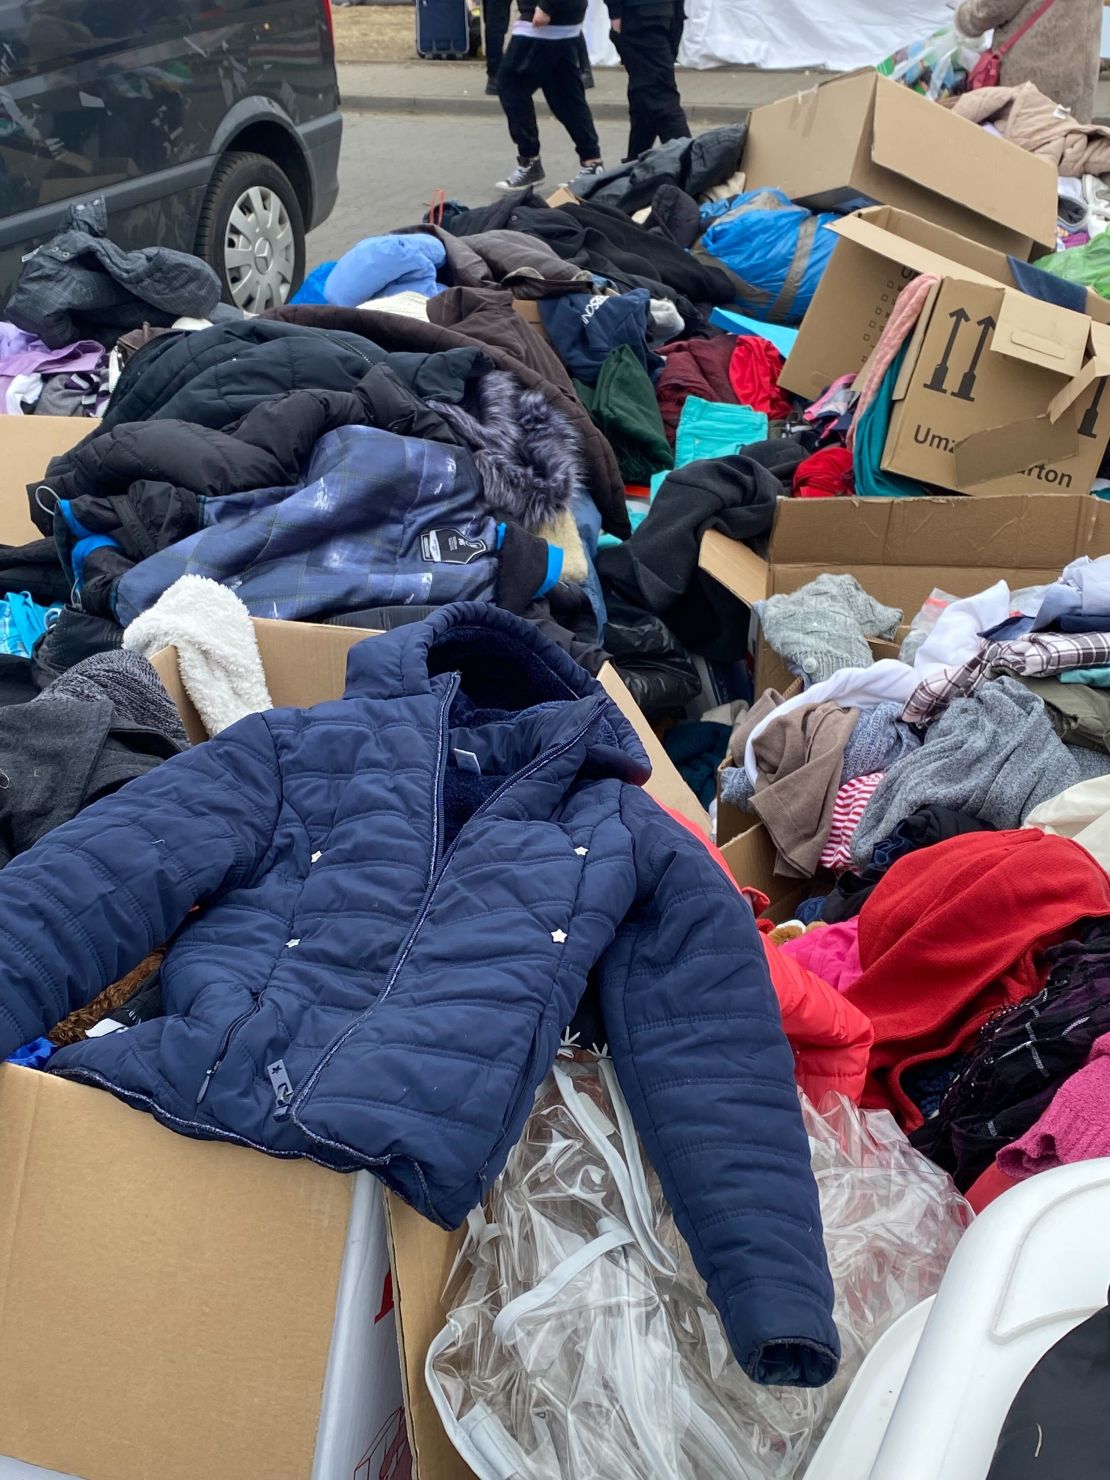 Small mountains of clothing, shoes, jackets and outerwear fill cardboard boxes just outside of the Przemyśl train station at a refugee relocation center.